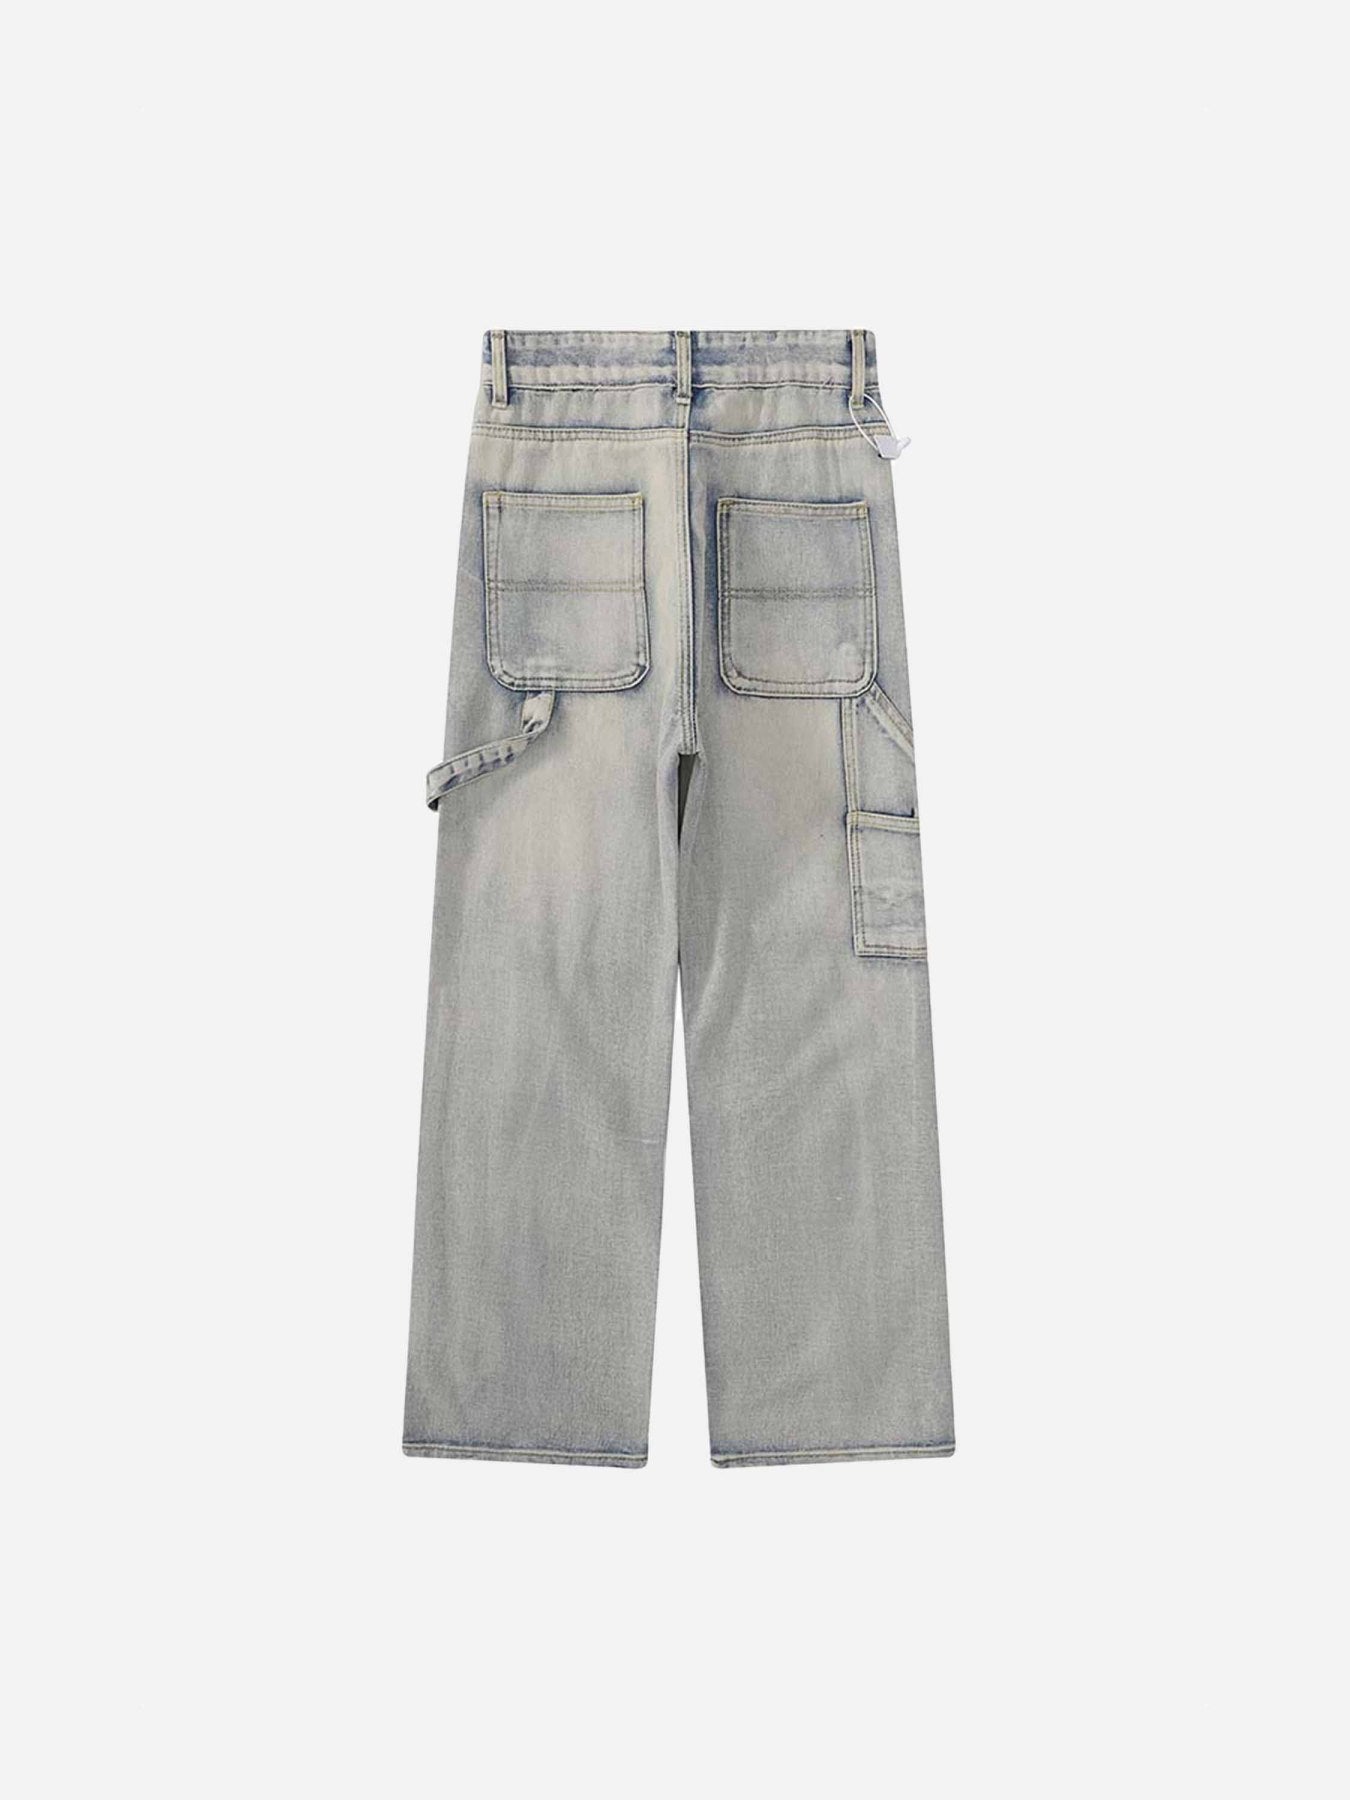 The Supermade Vintage Ink Wash Ripped Jeans